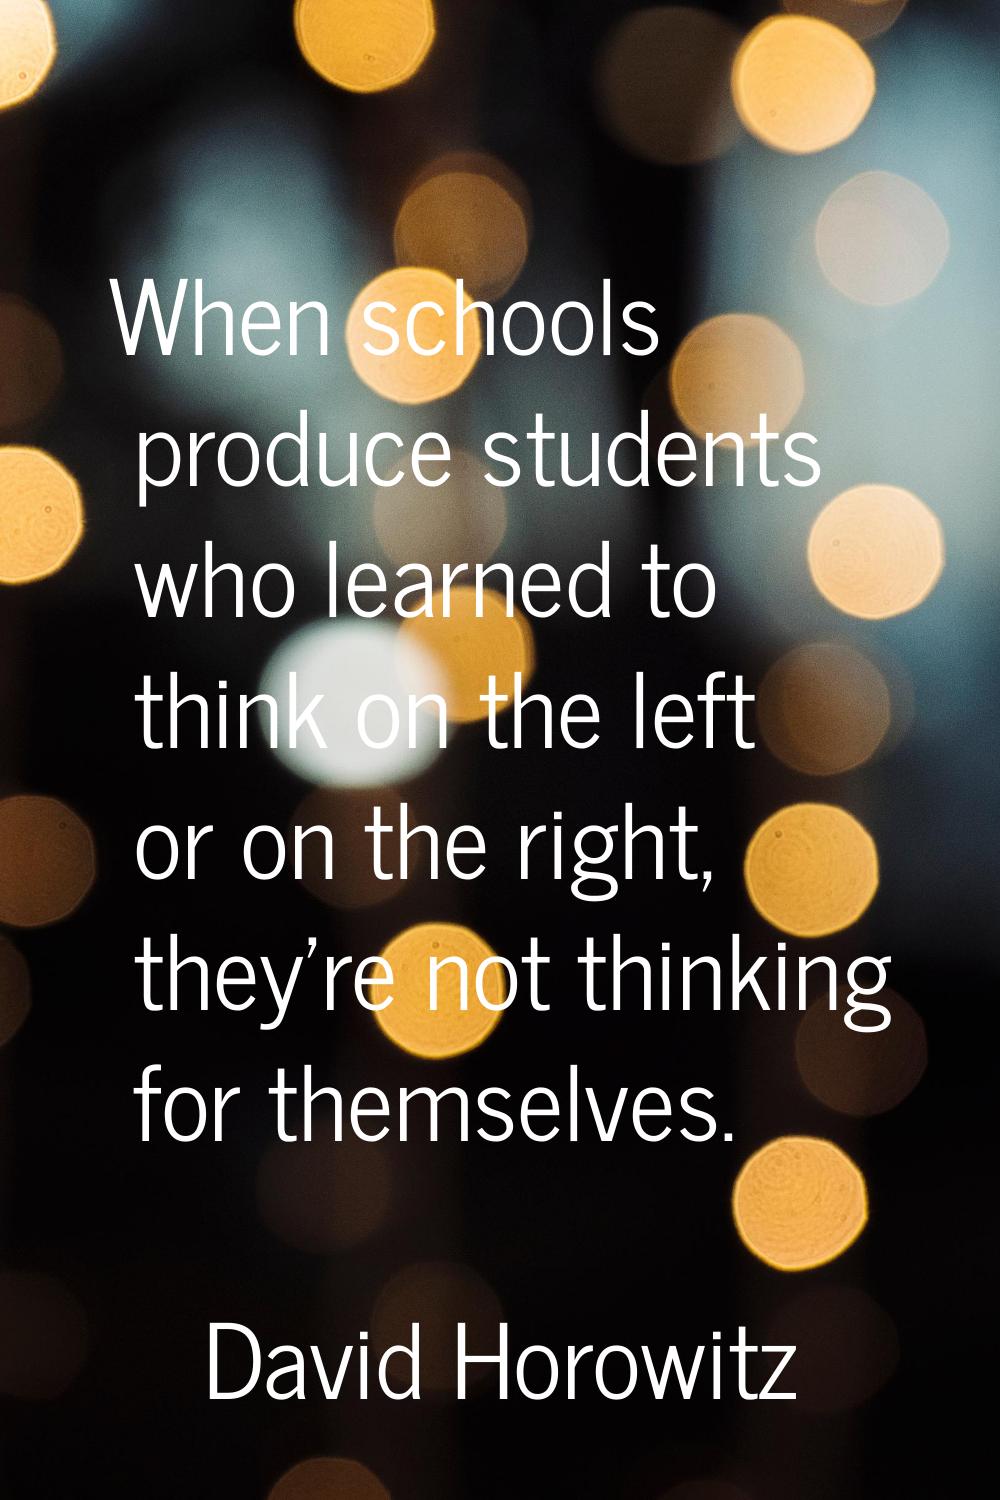 When schools produce students who learned to think on the left or on the right, they're not thinkin